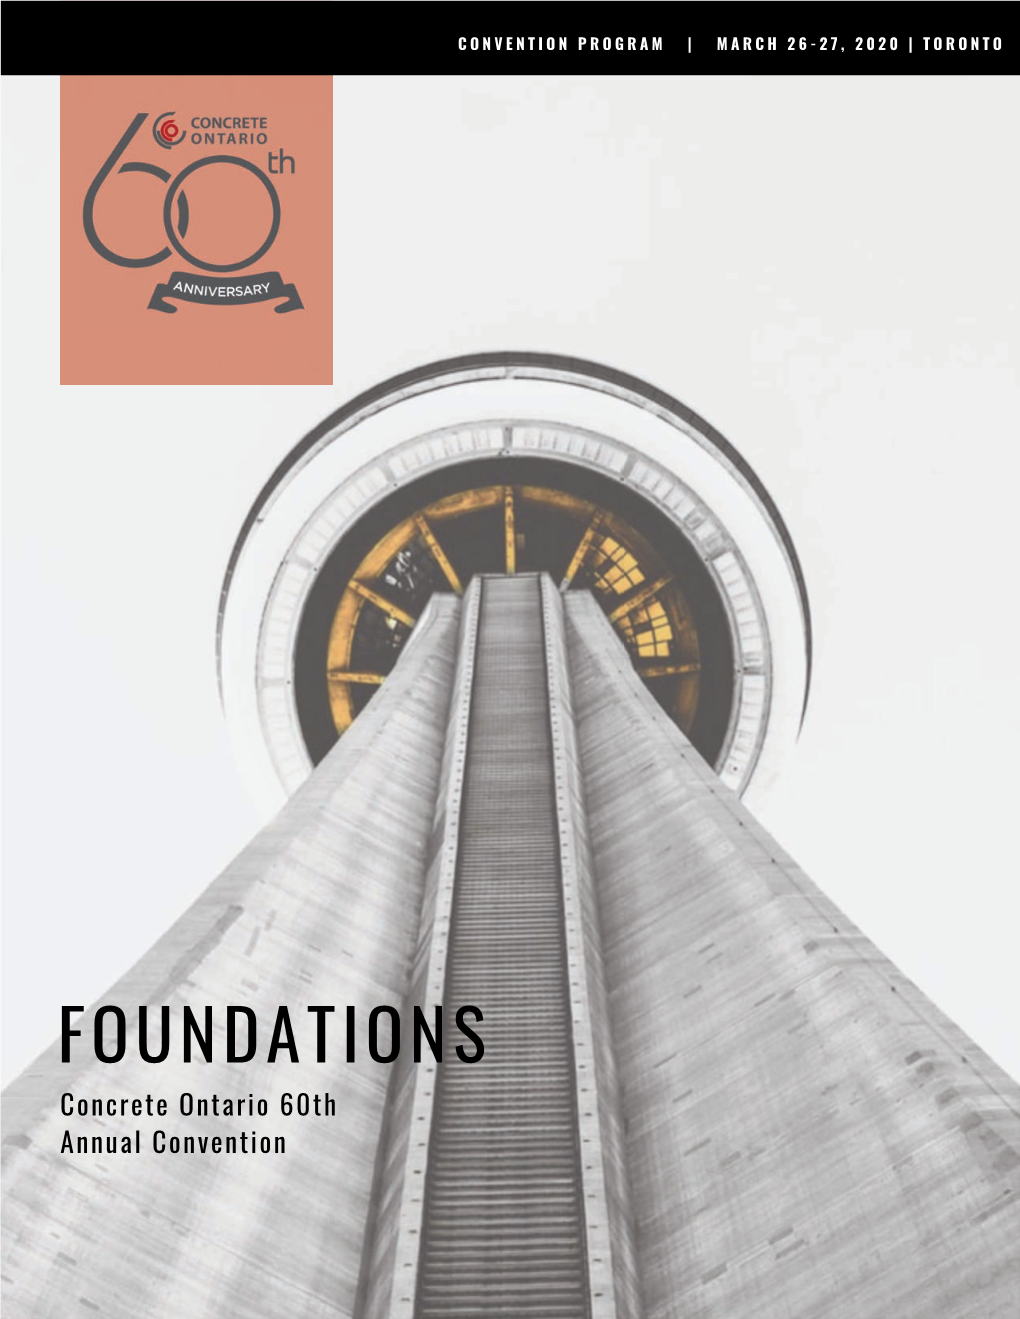 FOUNDATIONS Concrete Ontario 60Th Annual Convention CONVENTION PROGRAM | PAGE 1